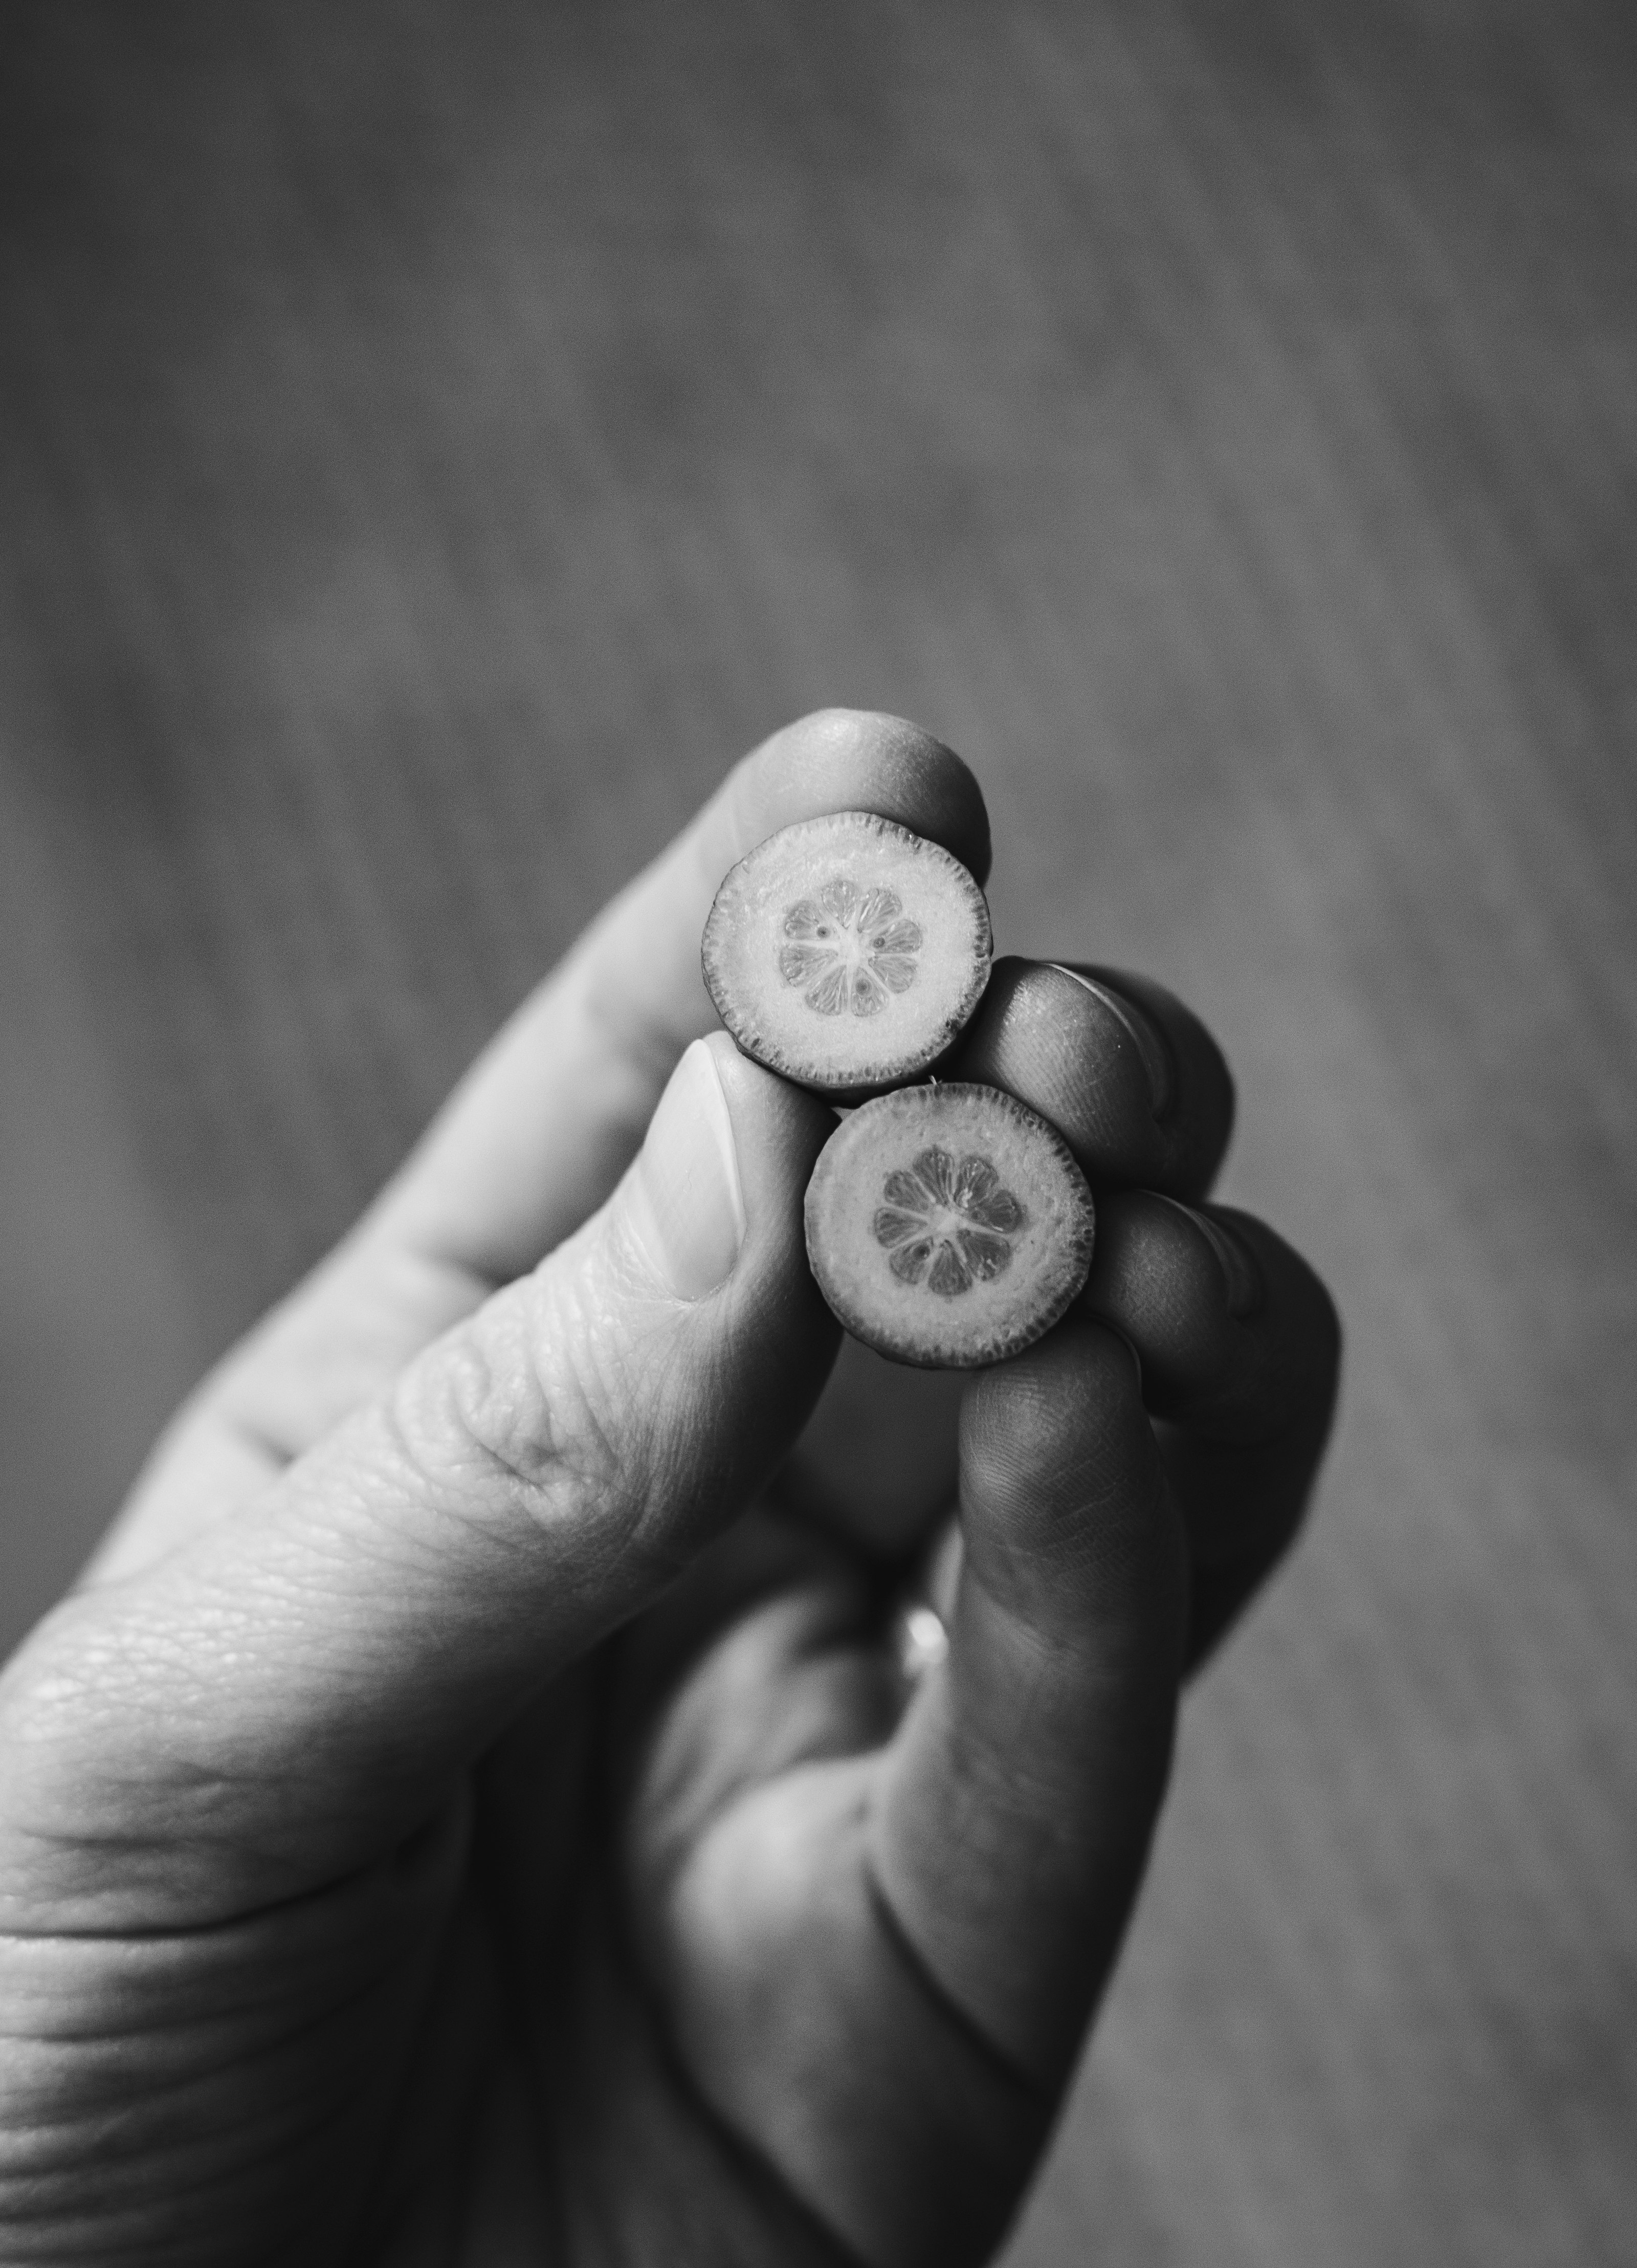 grayscale photo of person holding round coin